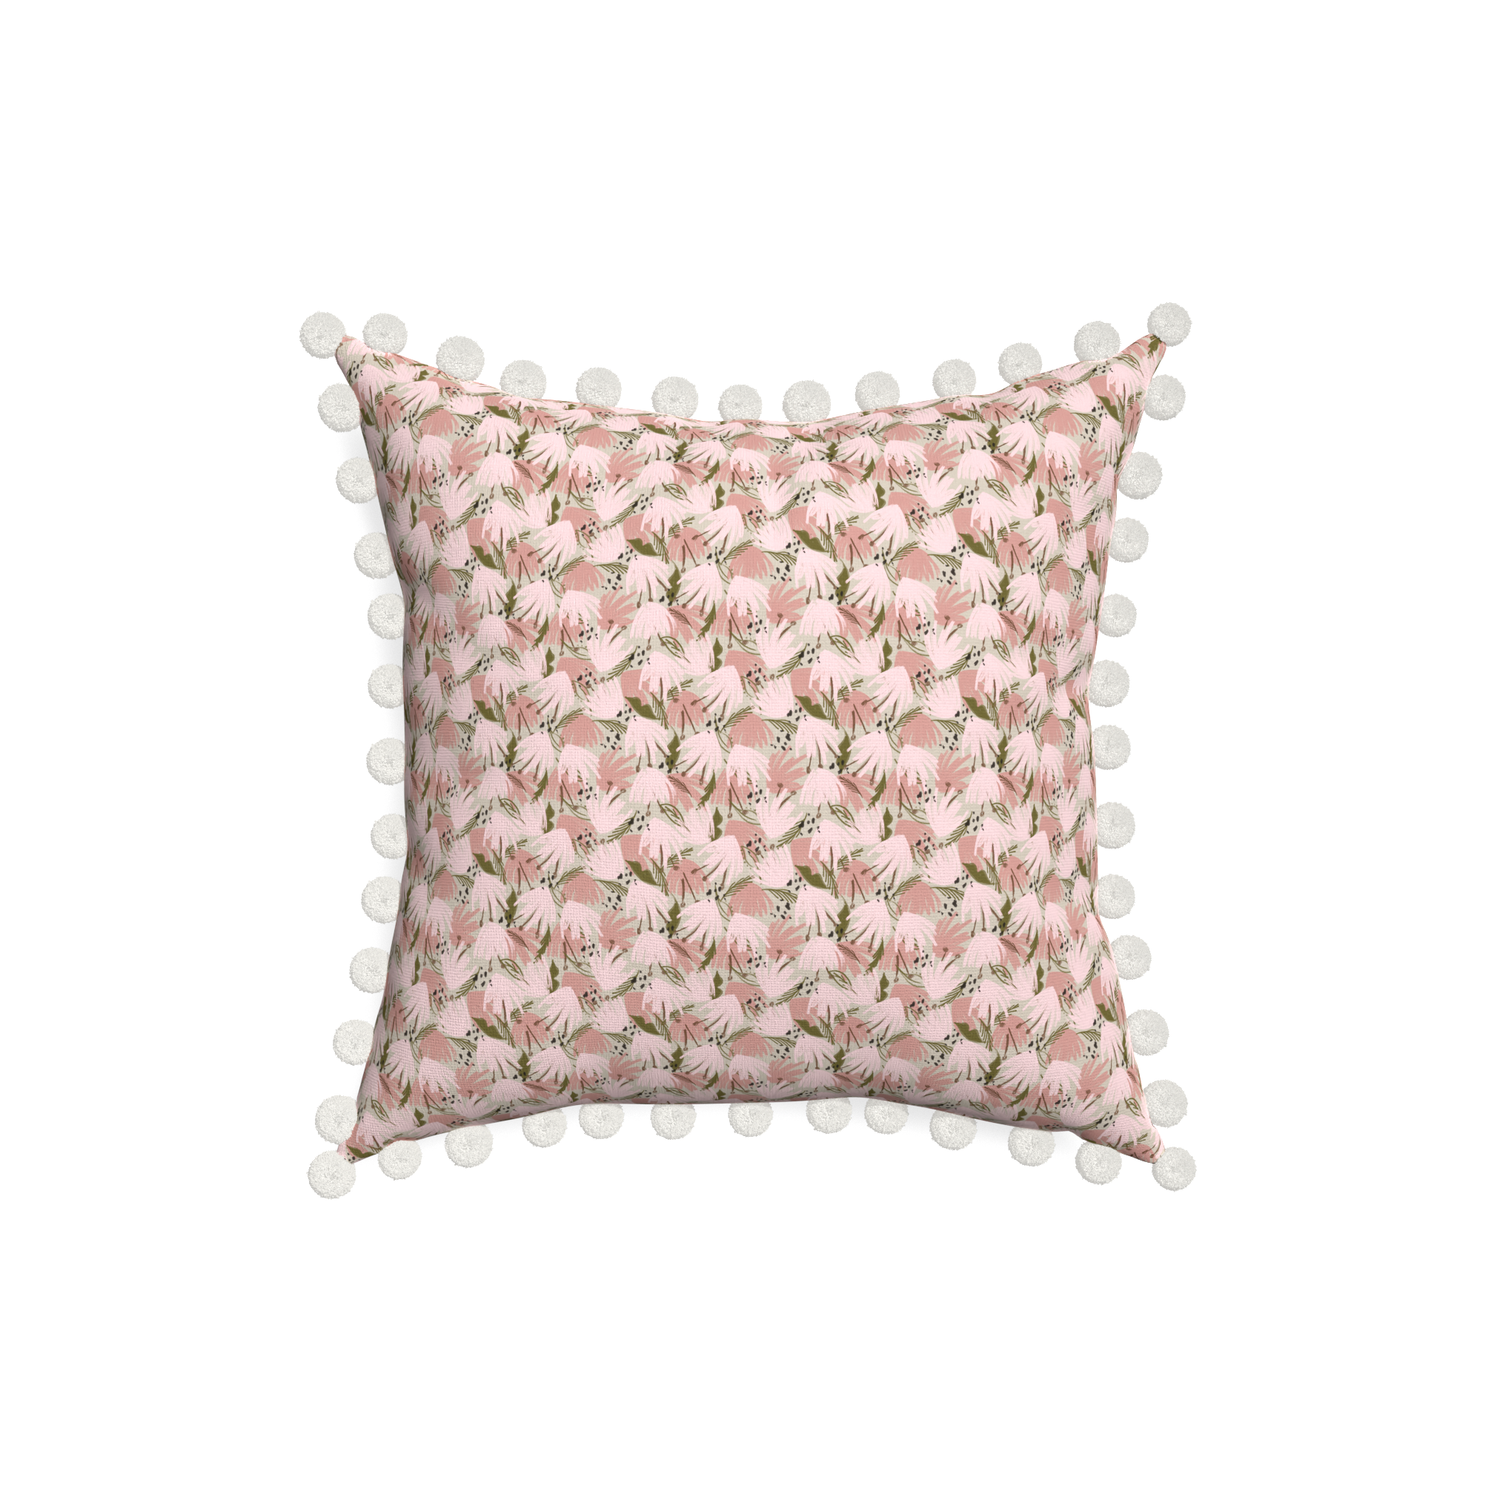 18-square eden pink custom pink floralpillow with snow pom pom on white background